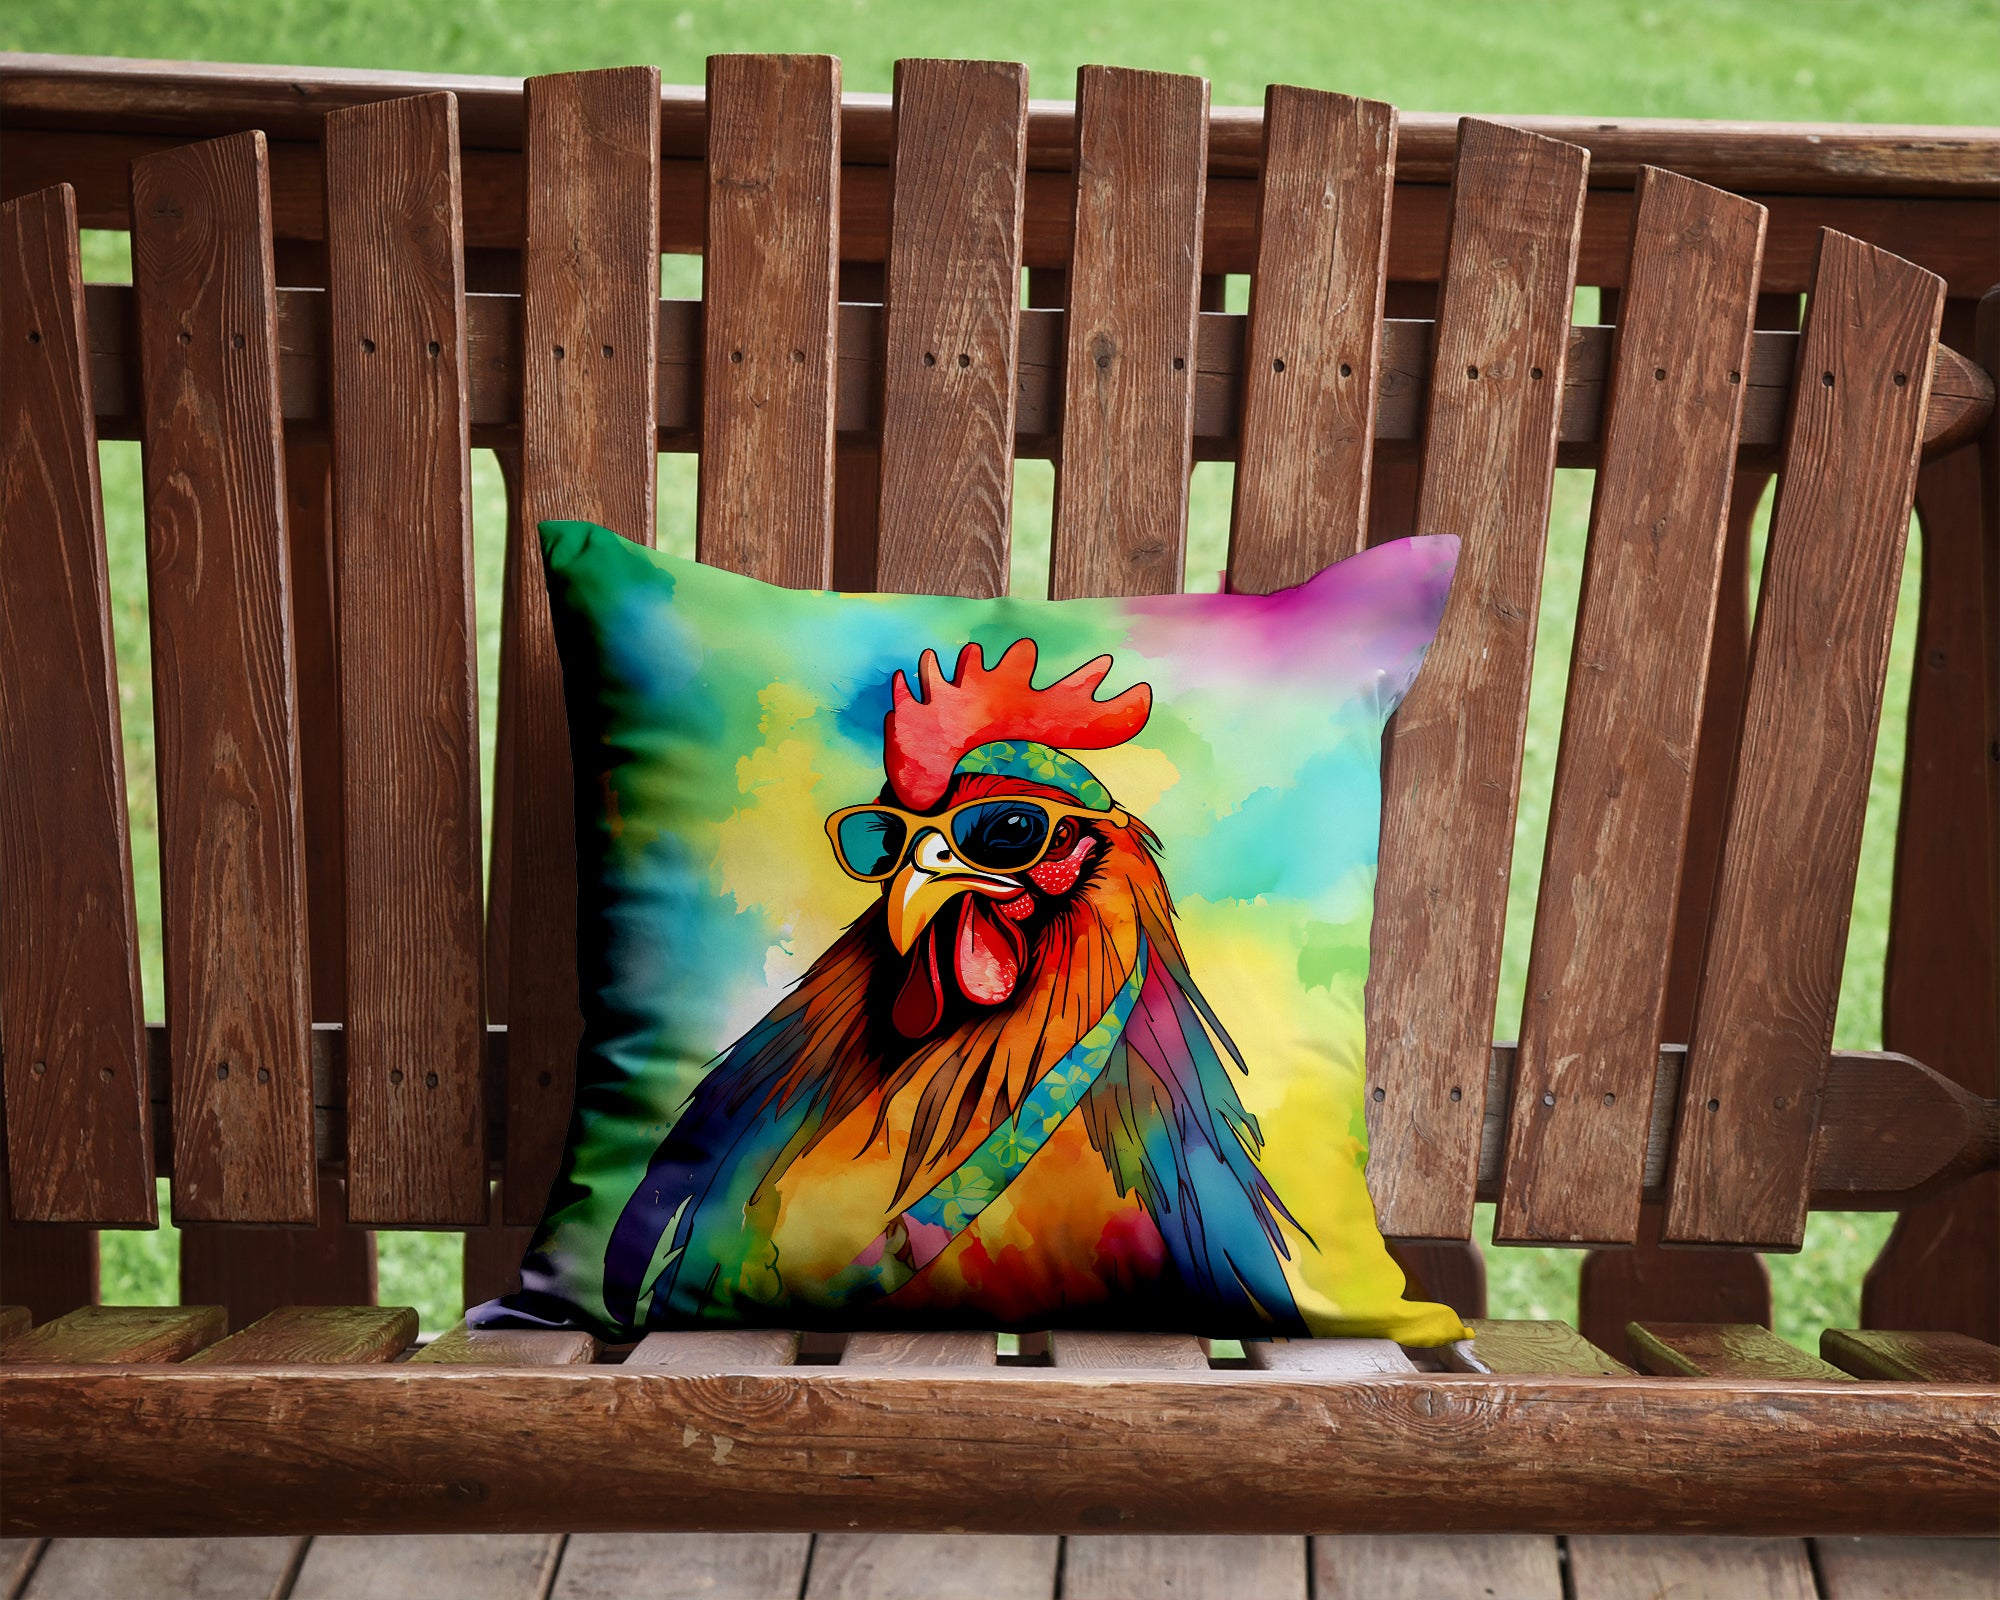 Buy this Hippie Animal Rooster Throw Pillow